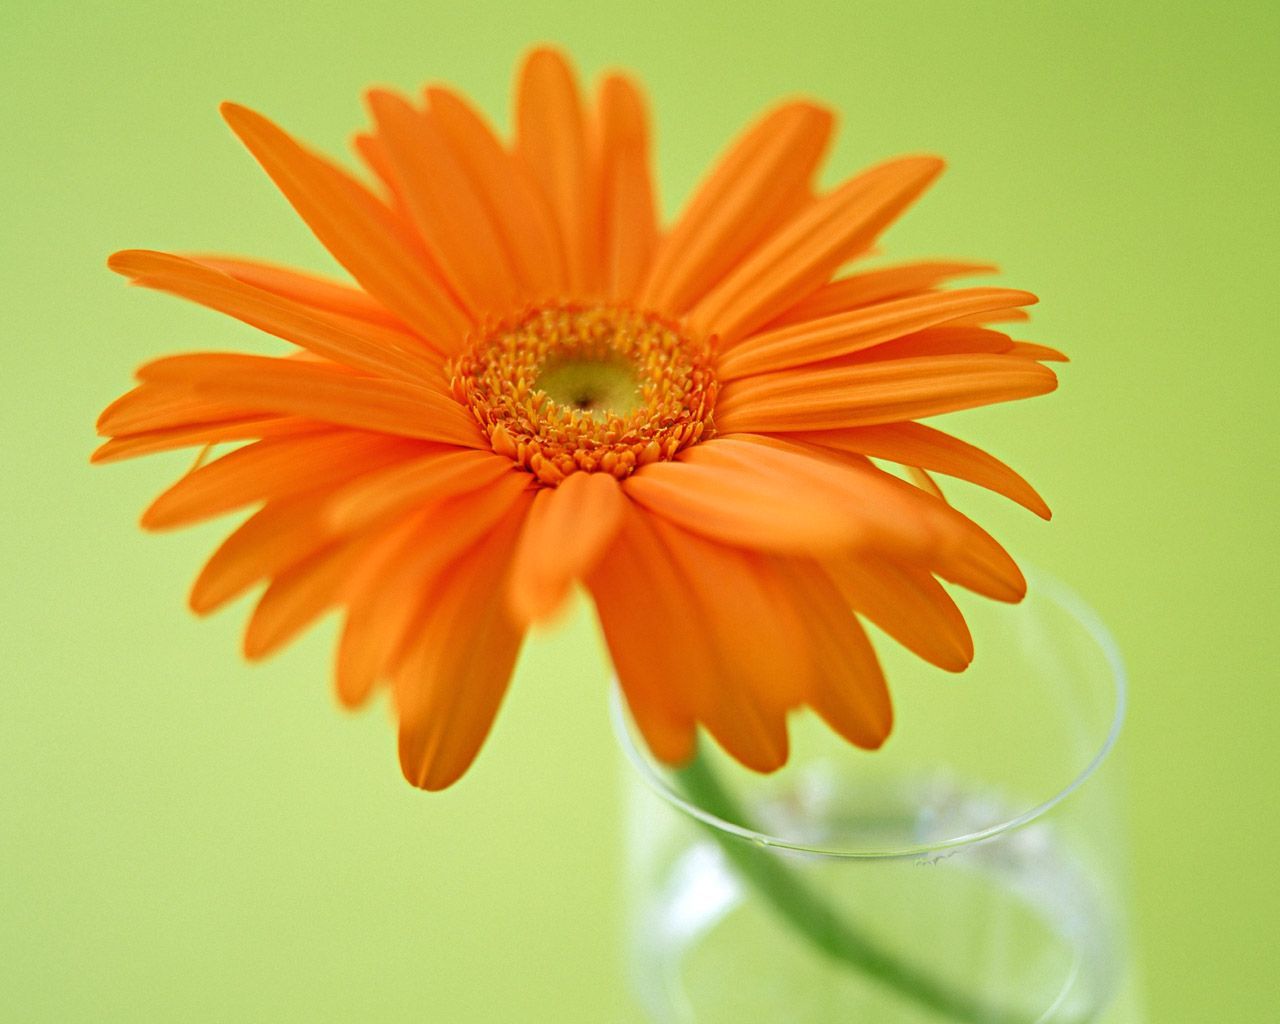 Gerbera Daisy background Wallpapers - HD Wallpapers 15567